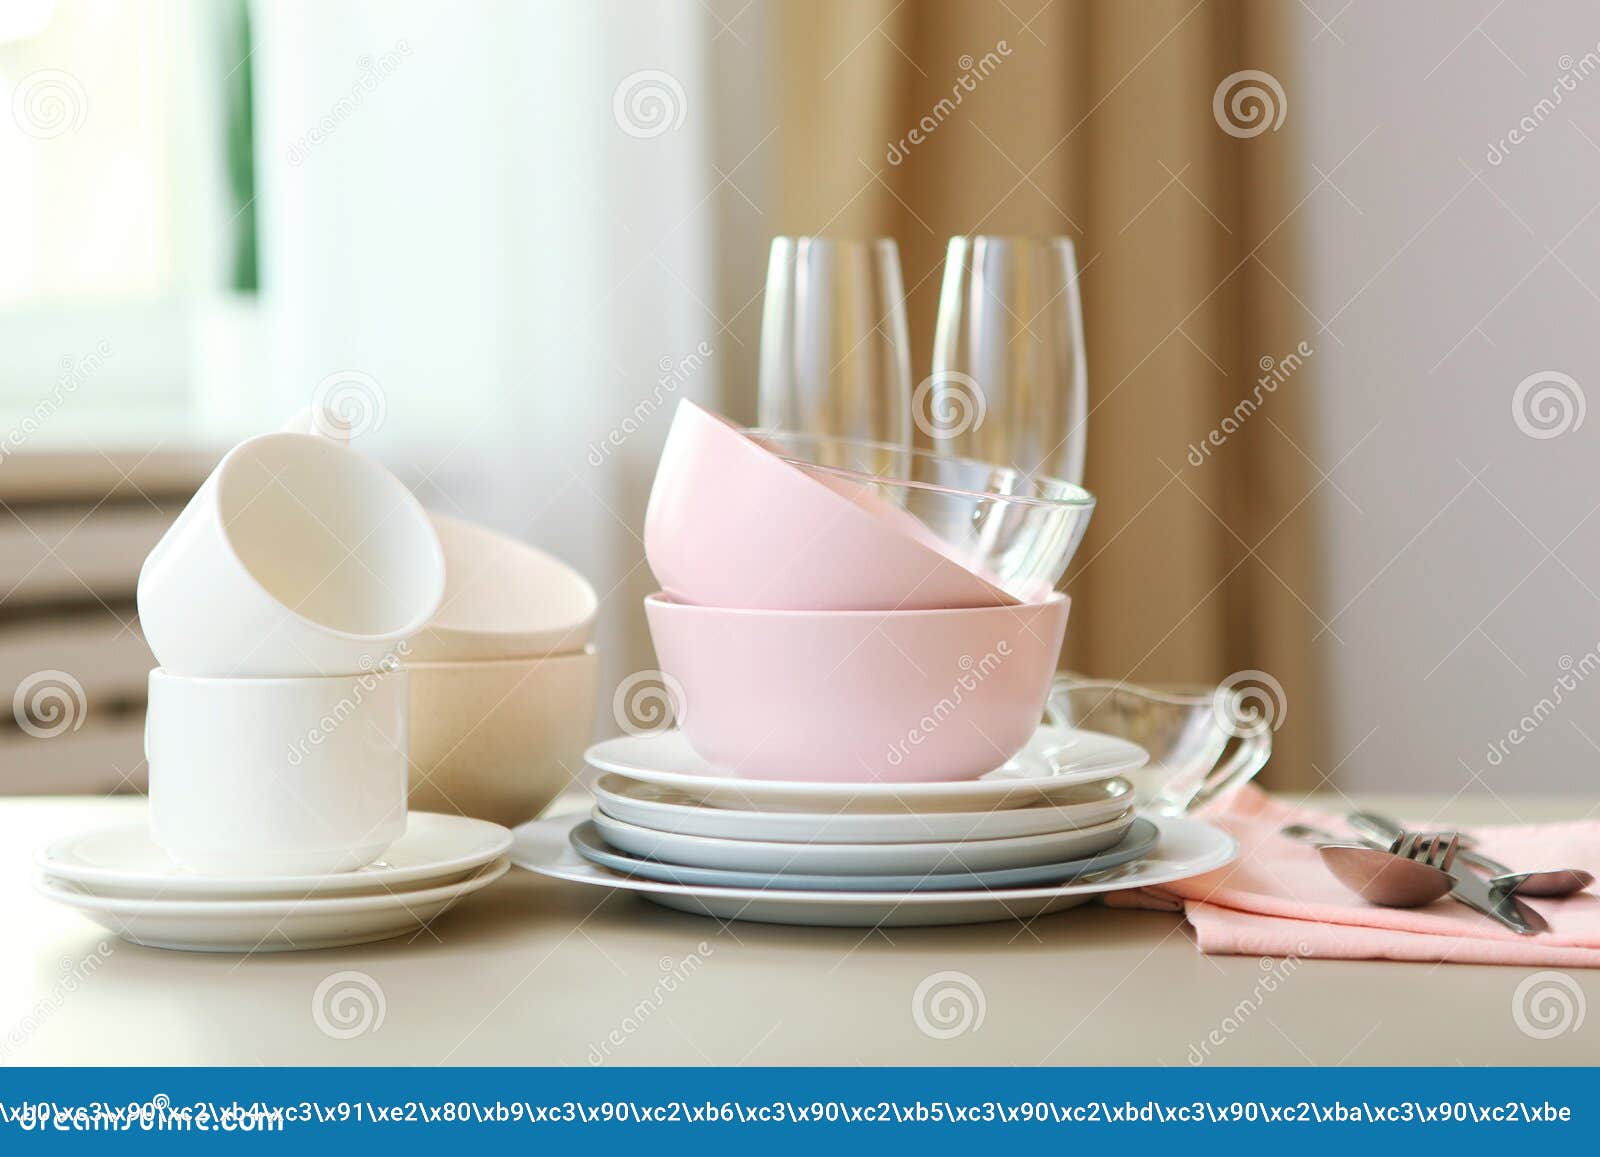 a set of tableware on the table.